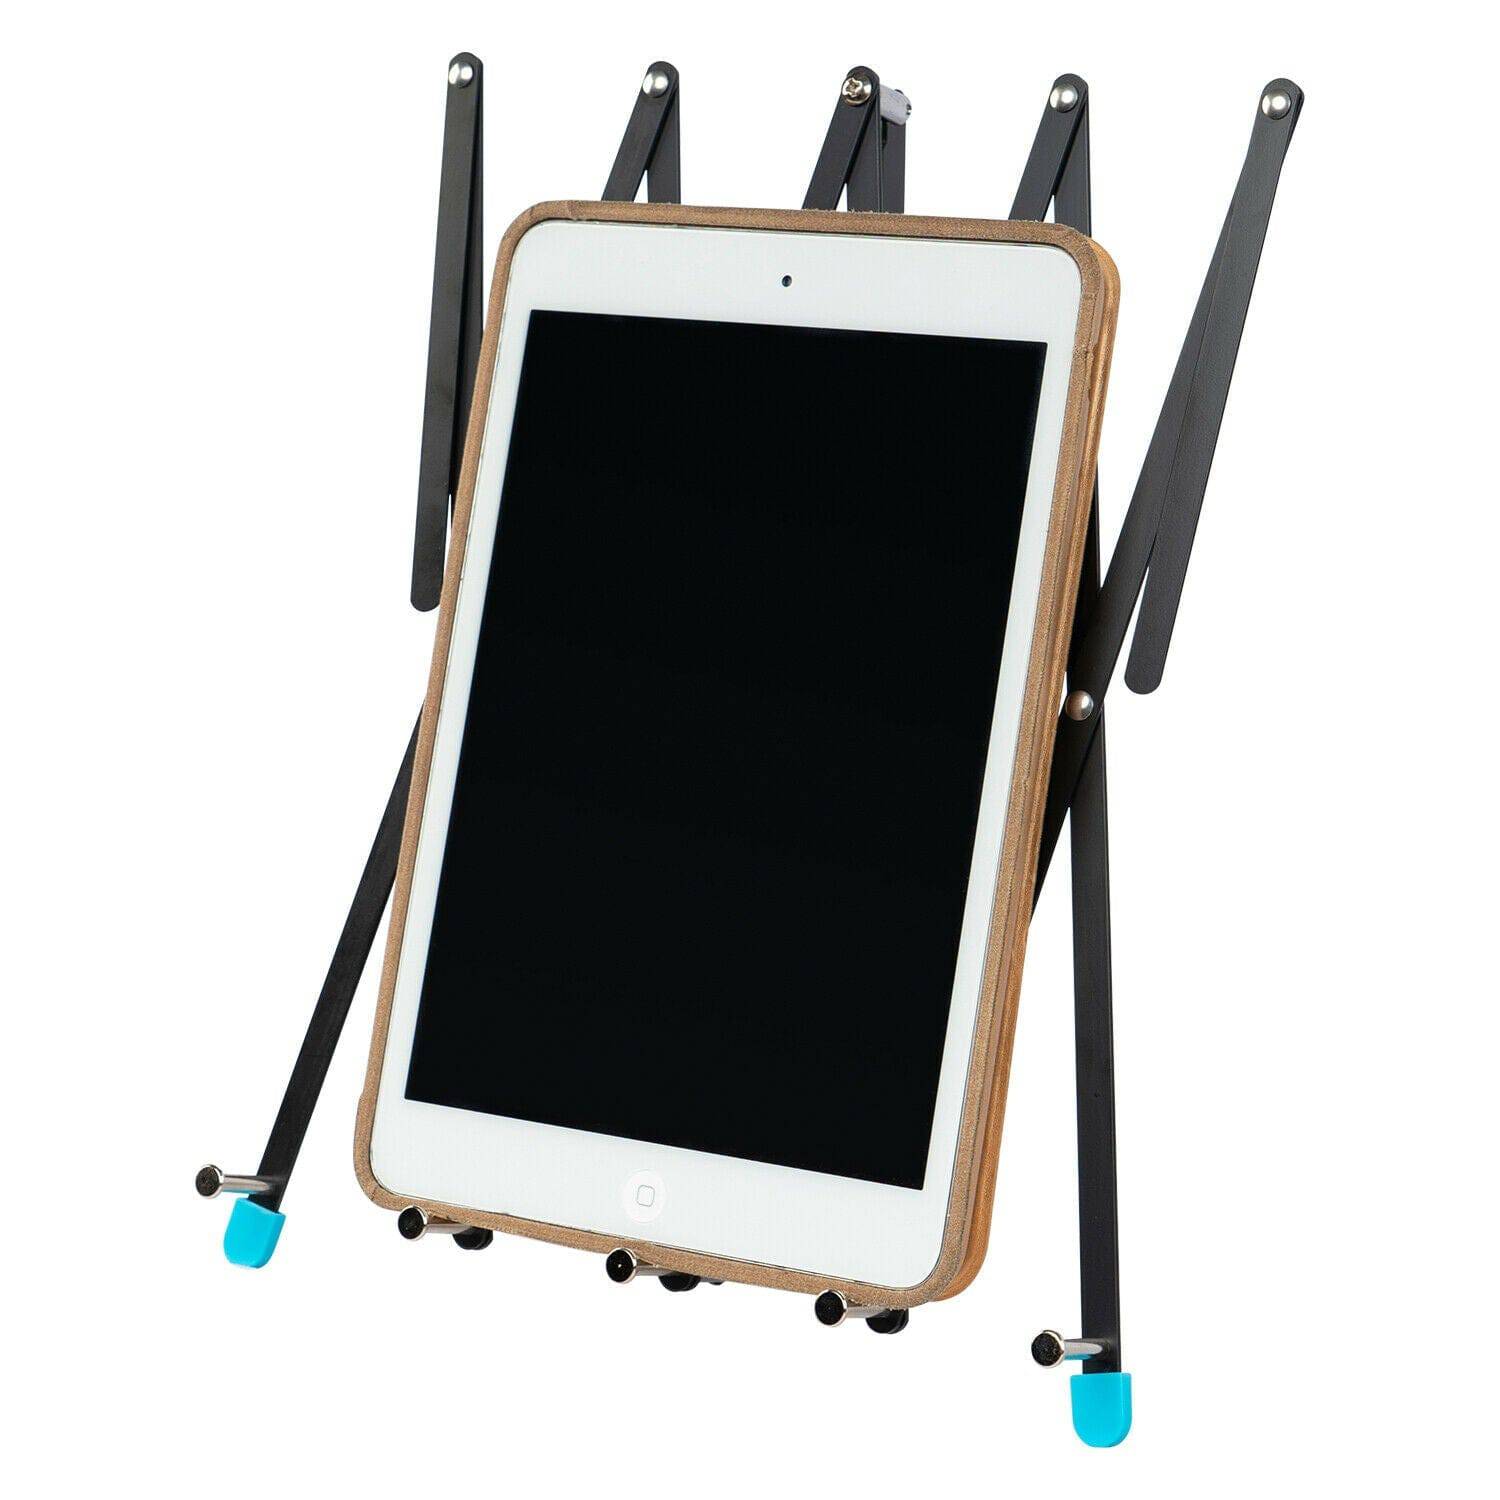 Guitto GSS-02 Desk Music Stand Collapsible Tablet Holder